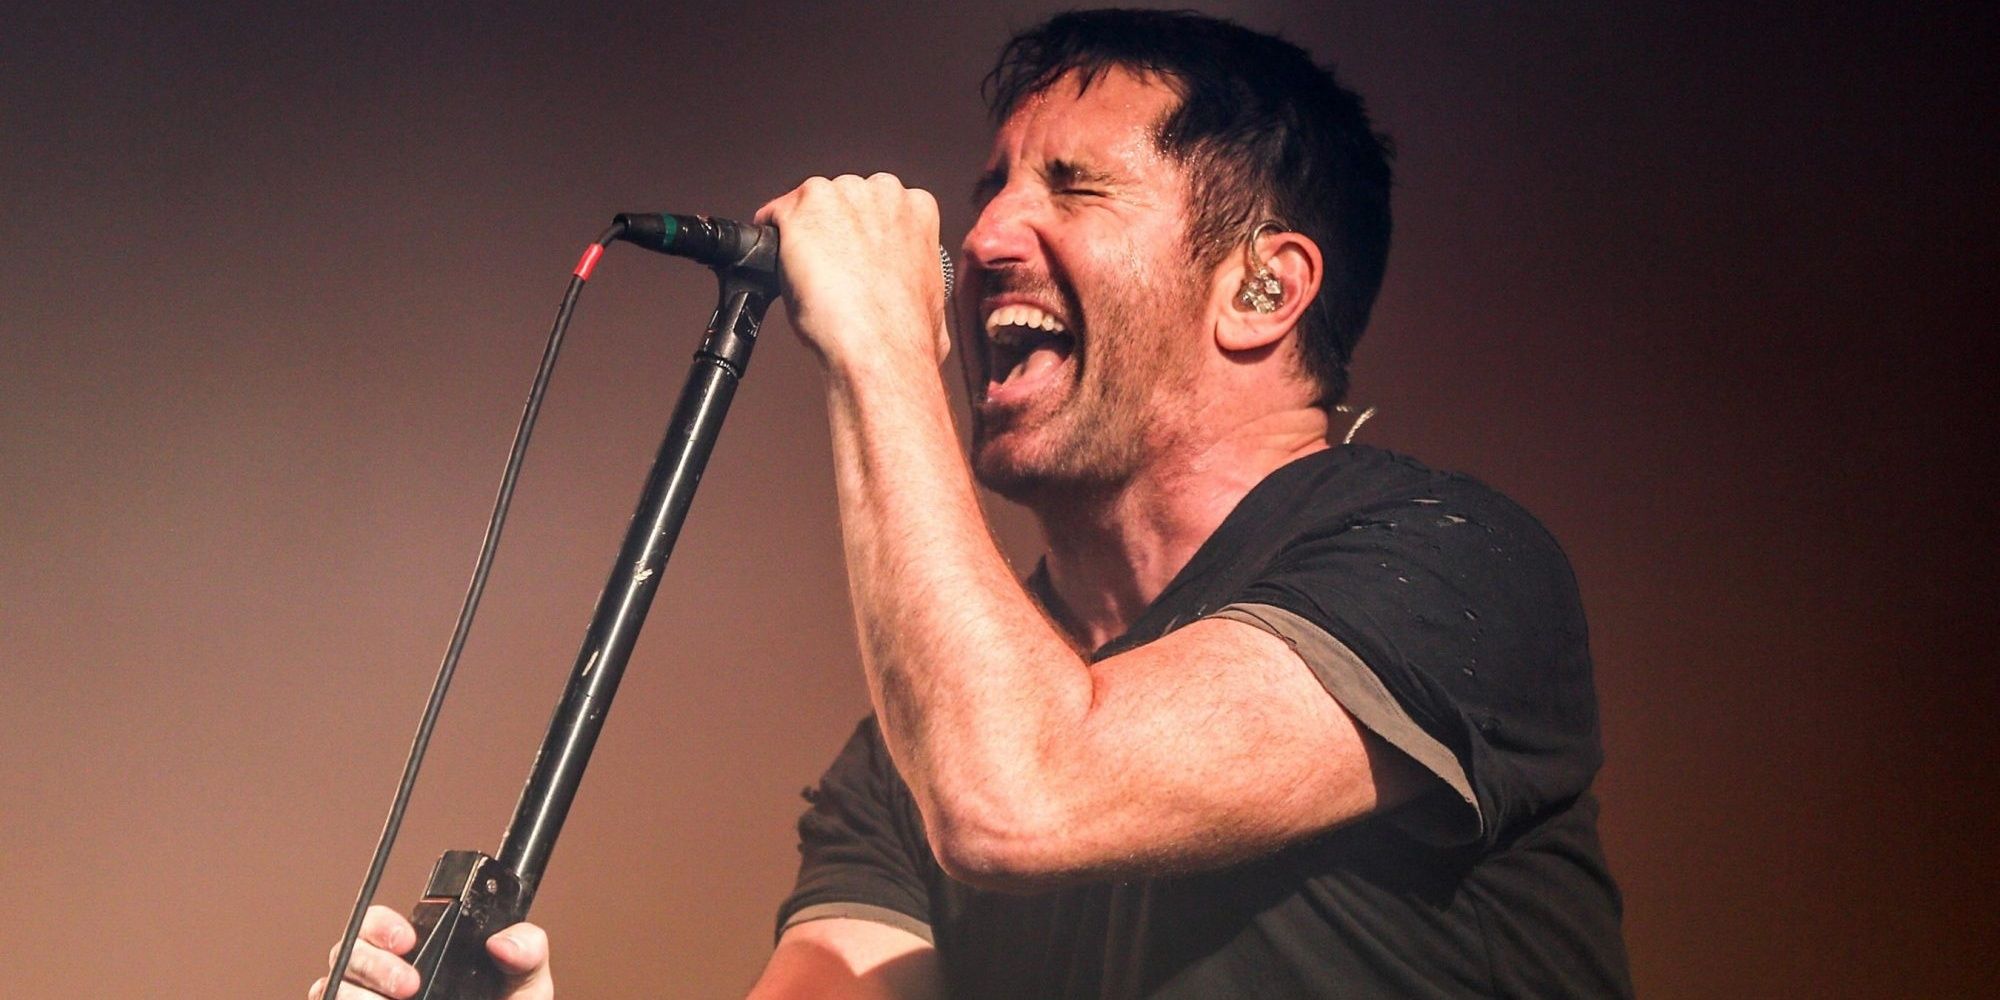 Trent Reznor singing into a microphone on stage